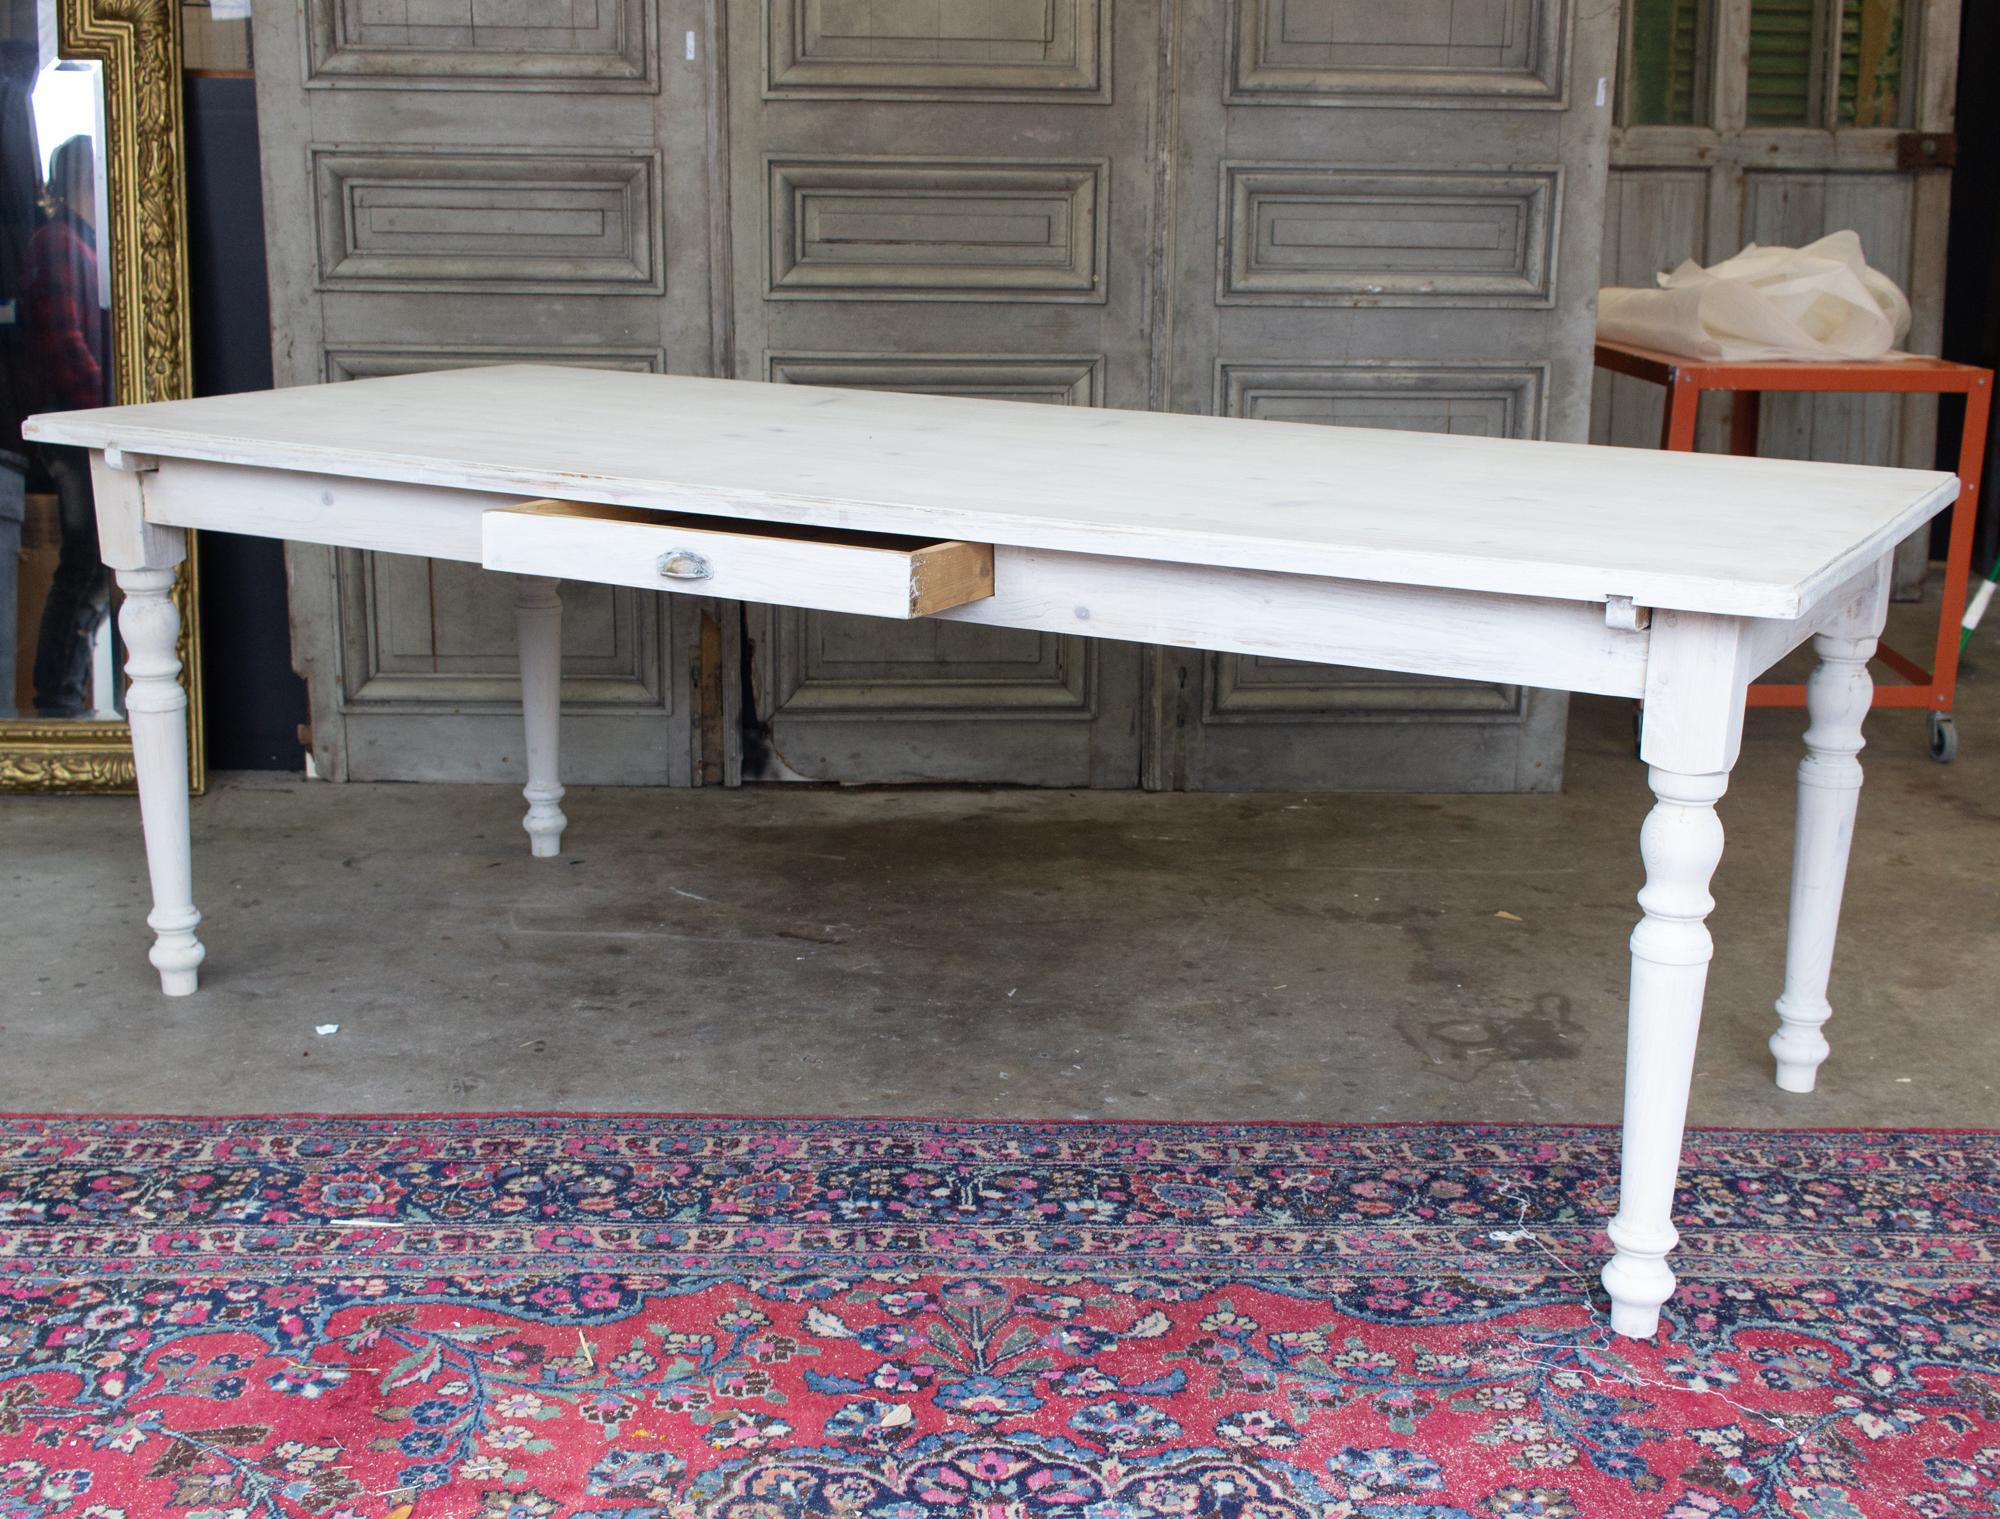 This large, pine farm table was sourced in France and features turned leg details and a single drawer at center. The drawer has a brass cup-pull installed, with some patination to the metal. The whitewash painted finish is new, and still allows the